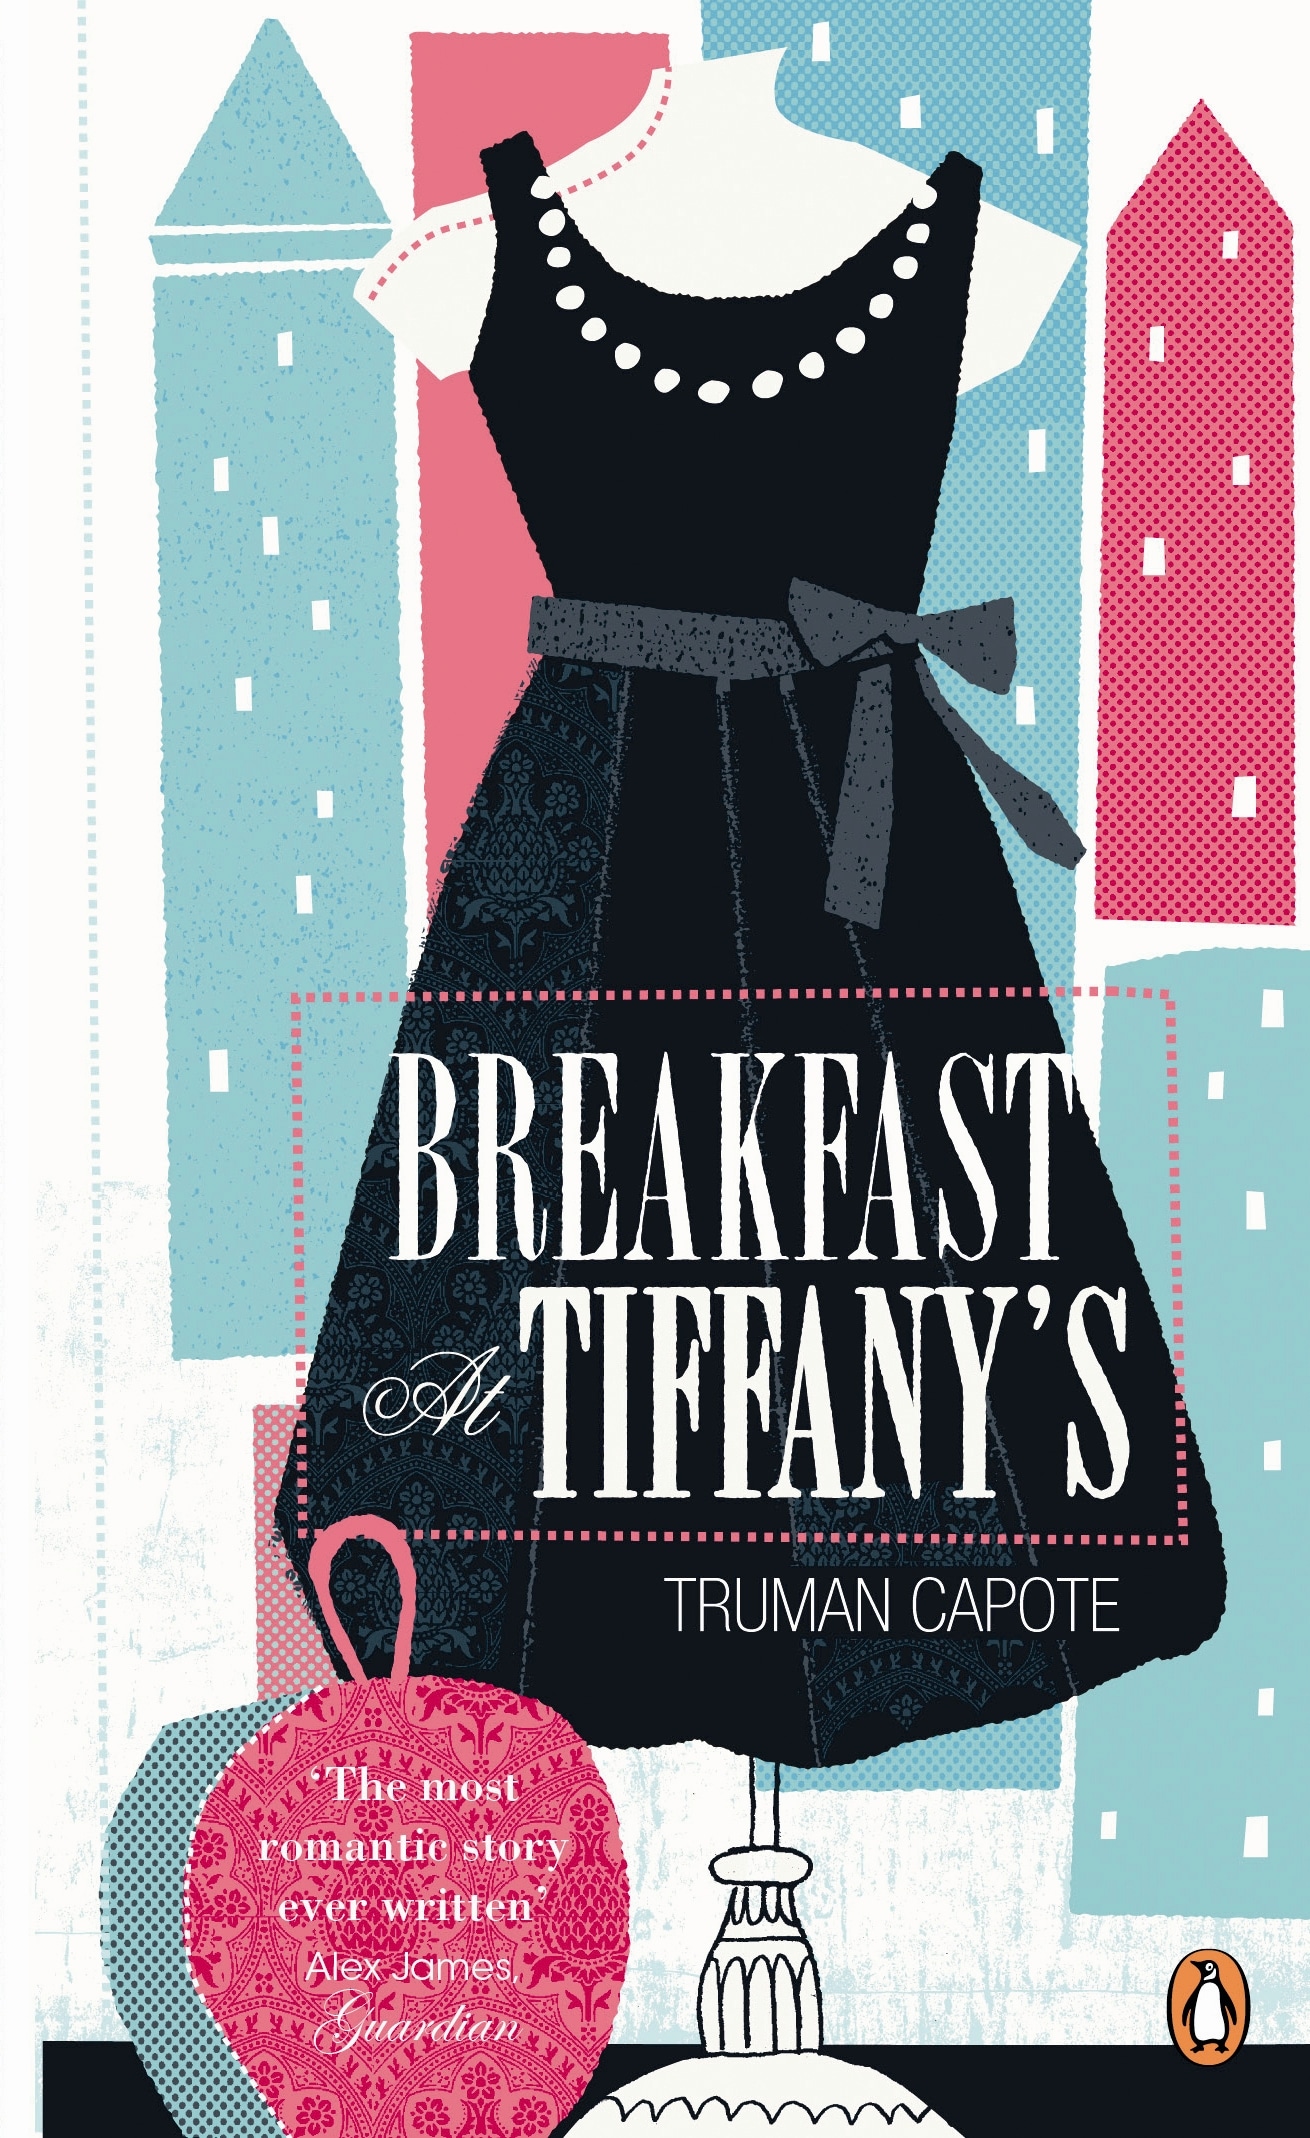 Book “Breakfast at Tiffany's” by Truman Capote — April 7, 2011